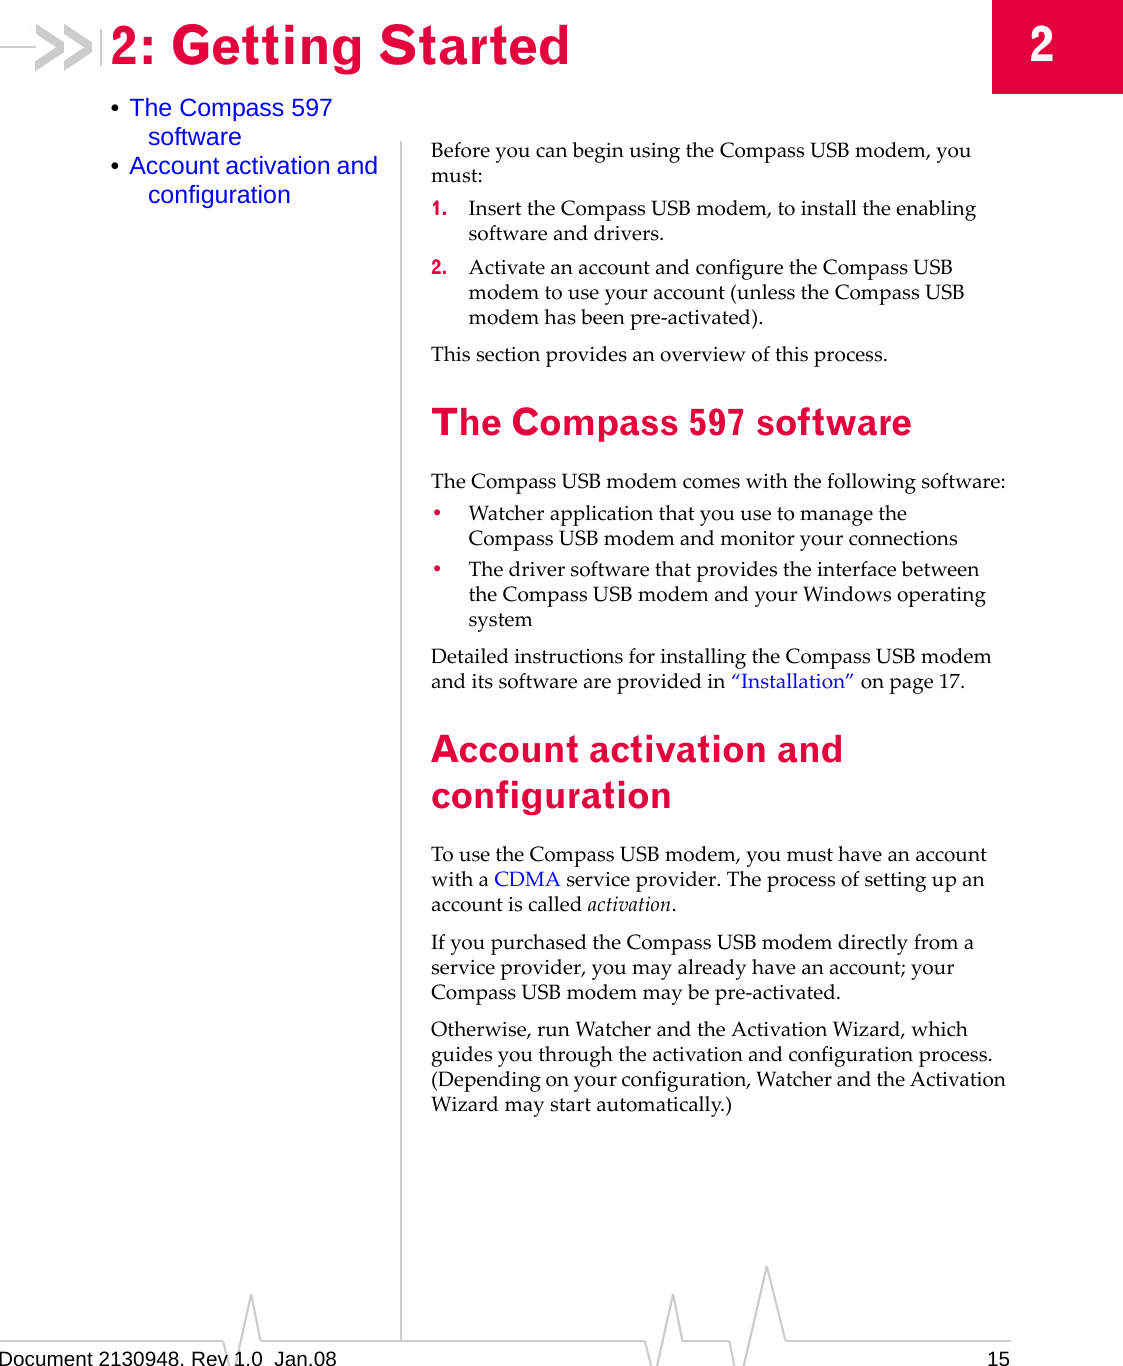 Document 2130948. Rev 1.0  Jan.08 1522: Getting Started•The Compass 597 software•Account activation and configurationBeforeyoucanbeginusingtheCompassUSBmodem,youmust:1. InserttheCompassUSBmodem,toinstalltheenablingsoftwareanddrivers.2. ActivateanaccountandconfiguretheCompassUSBmodemtouseyouraccount(unlesstheCompassUSBmodemhasbeenpre‐activated).Thissectionprovidesanoverviewofthisprocess.The Compass 597 softwareTheCompassUSBmodemcomeswiththefollowingsoftware:•WatcherapplicationthatyouusetomanagetheCompassUSBmodemandmonitoryourconnections•ThedriversoftwarethatprovidestheinterfacebetweentheCompassUSBmodemandyourWindowsoperatingsystemDetailedinstructionsforinstallingtheCompassUSBmodemanditssoftwareareprovidedin“Installation”onpage 17.Account activation and configurationTousetheCompassUSBmodem,youmusthaveanaccountwithaCDMAserviceprovider.Theprocessofsettingupanaccountiscalledactivation.IfyoupurchasedtheCompassUSBmodemdirectlyfromaserviceprovider,youmayalreadyhaveanaccount;yourCompassUSBmodemmaybepre‐activated.Otherwise,runWatcherandtheActivationWizard,whichguidesyouthroughtheactivationandconfigurationprocess.(Dependingonyourconfiguration,WatcherandtheActivationWizardmaystartautomatically.)